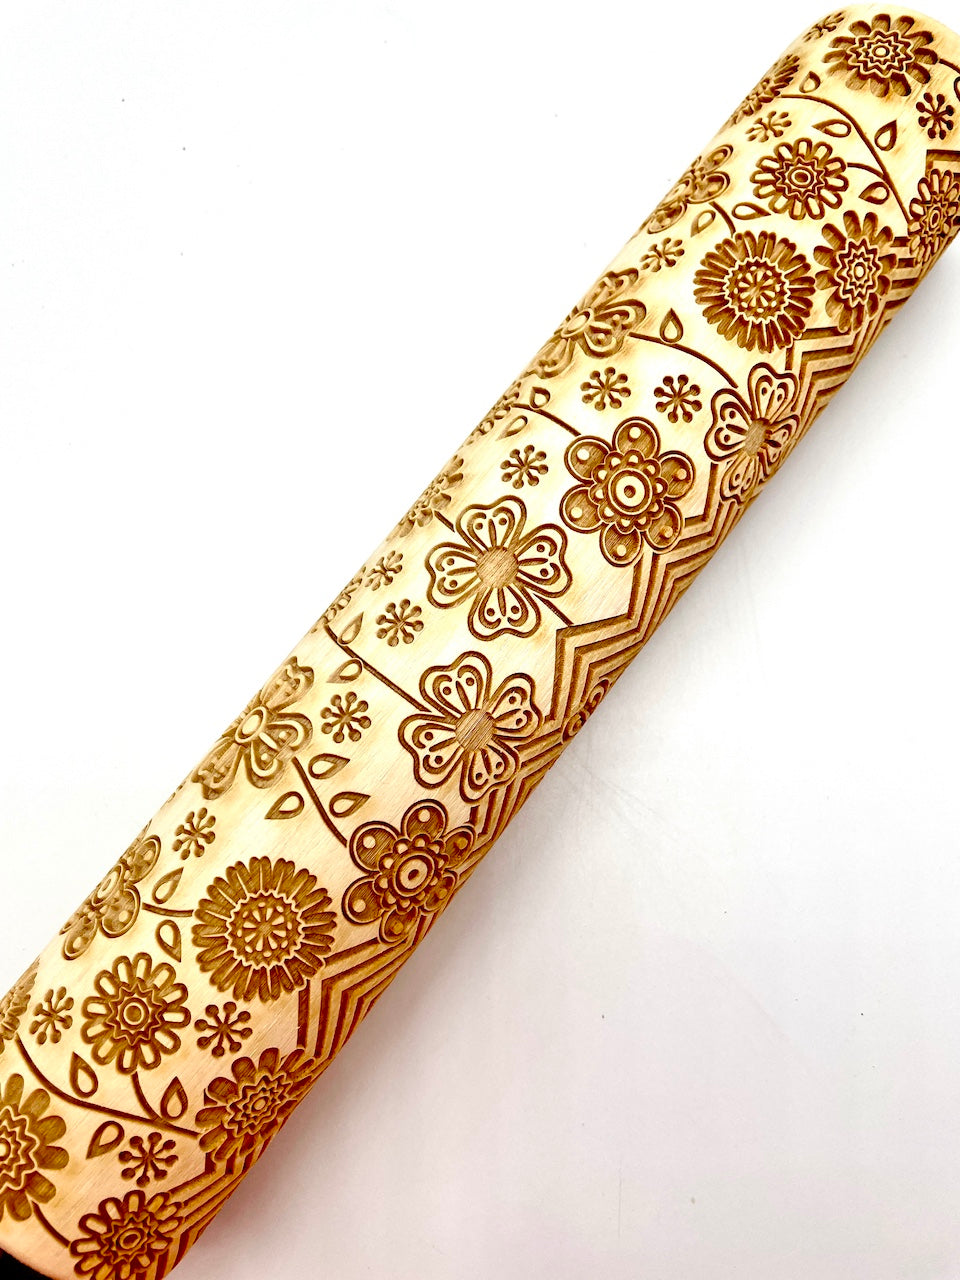 Chevron Mod Floral Textured Rolling Pin